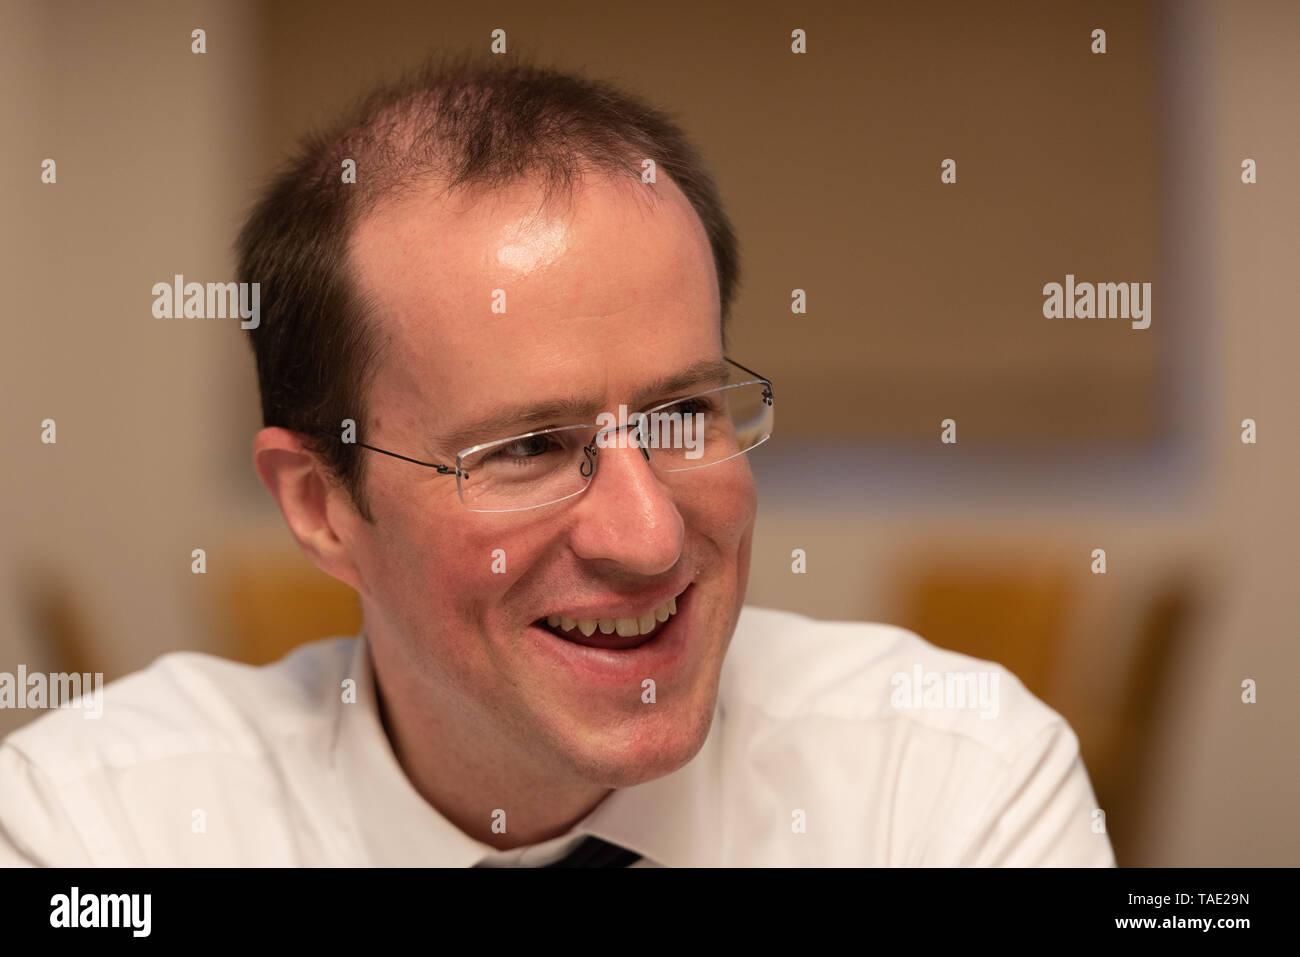 Matthew Elliott is a British political strategist and lobbyist involved - with . Dominic Cummings - in the Brexit campaign. Stock Photo